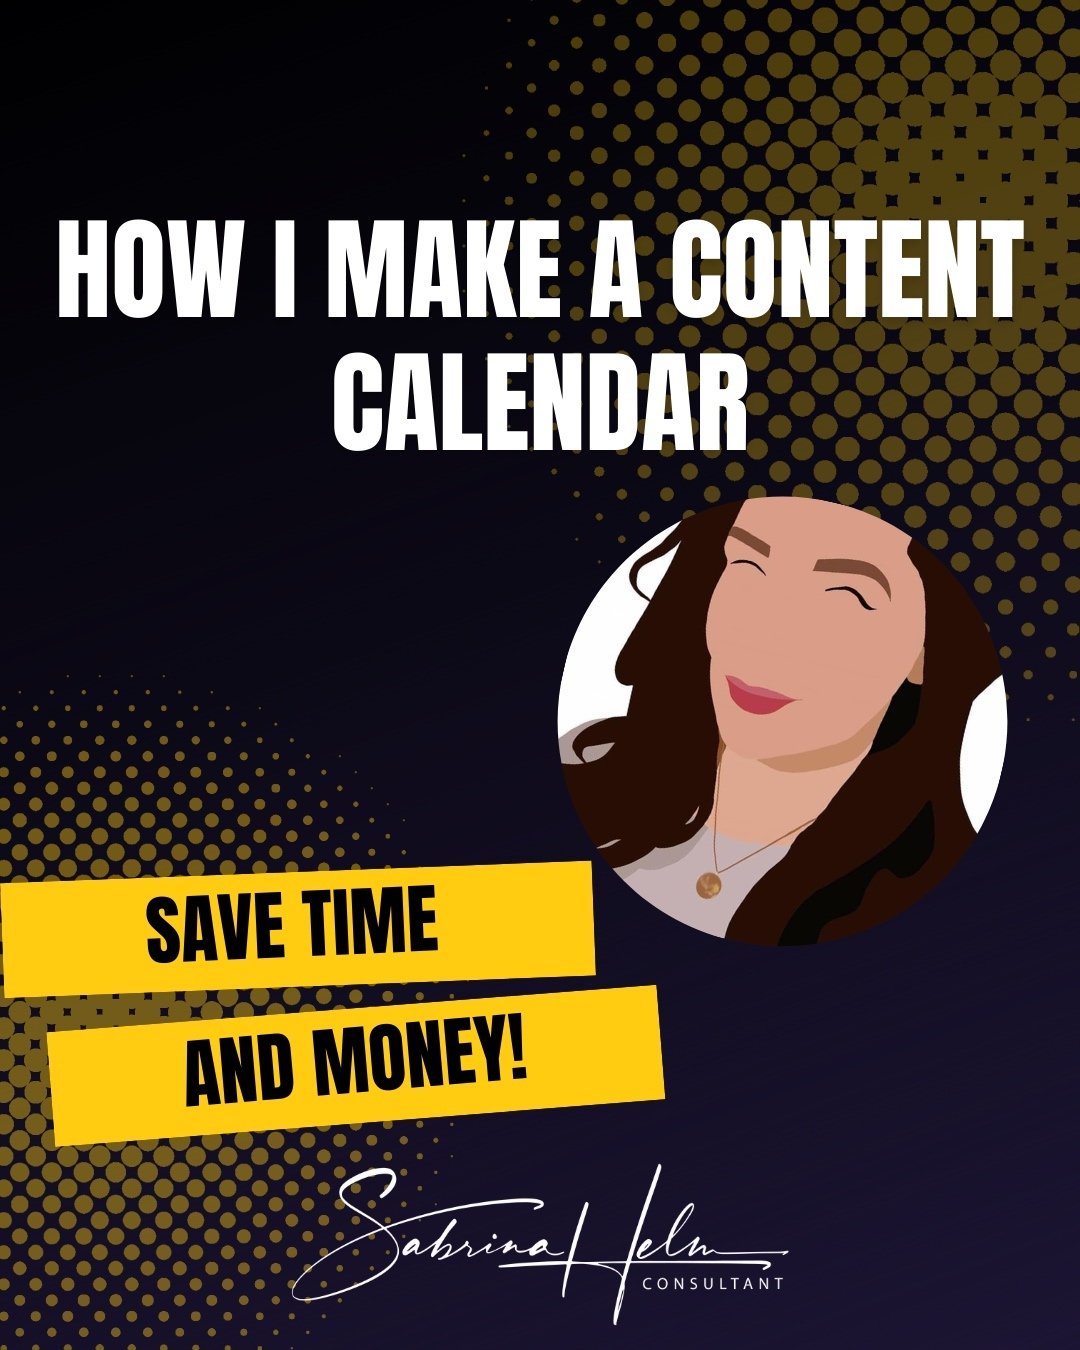 📆Wanna know how I make my content calendar? 
Check out my YouTube video! 

Save yourself 
⏰time
⚡️energy
💰MONEY!

You know where to find the 🔗!